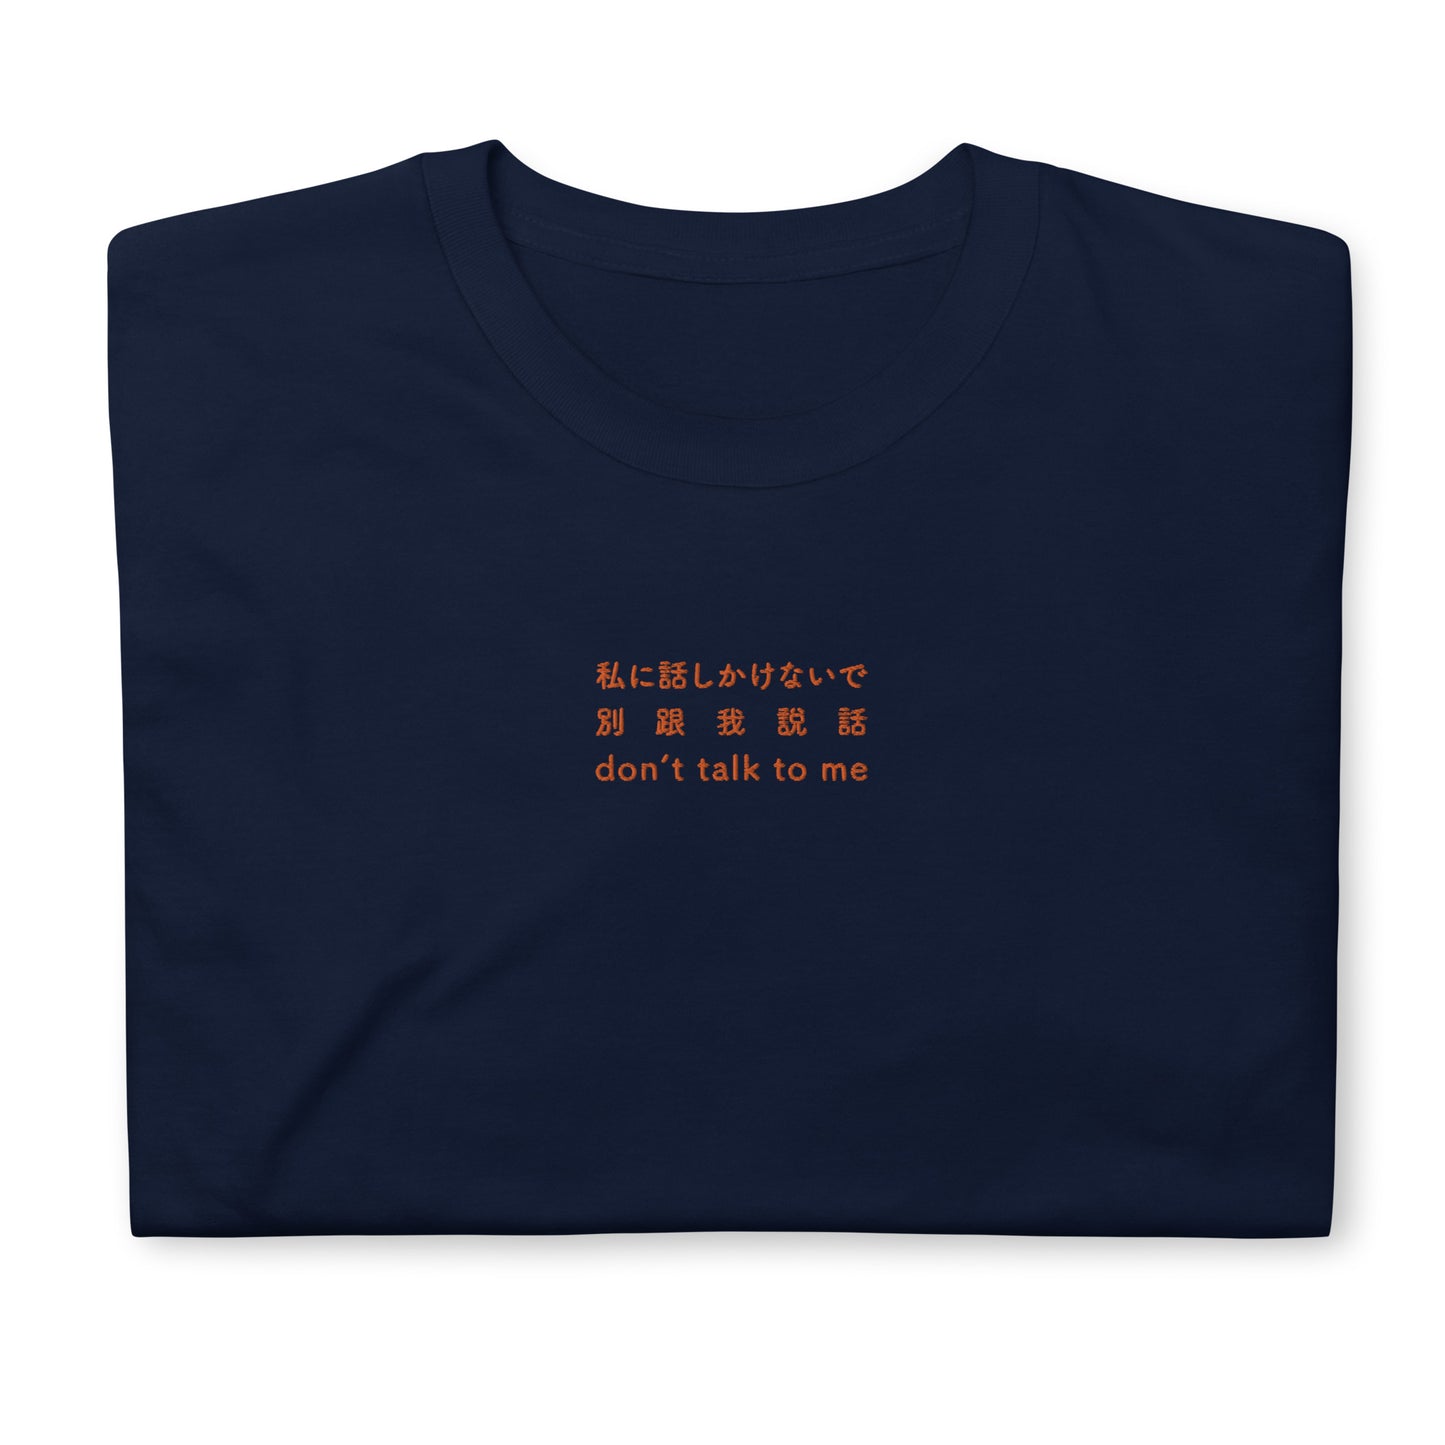 Navy High Quality Tee - Front Design with an Orange Embroidery "don't talk to me" in Japanese,Chinese and English